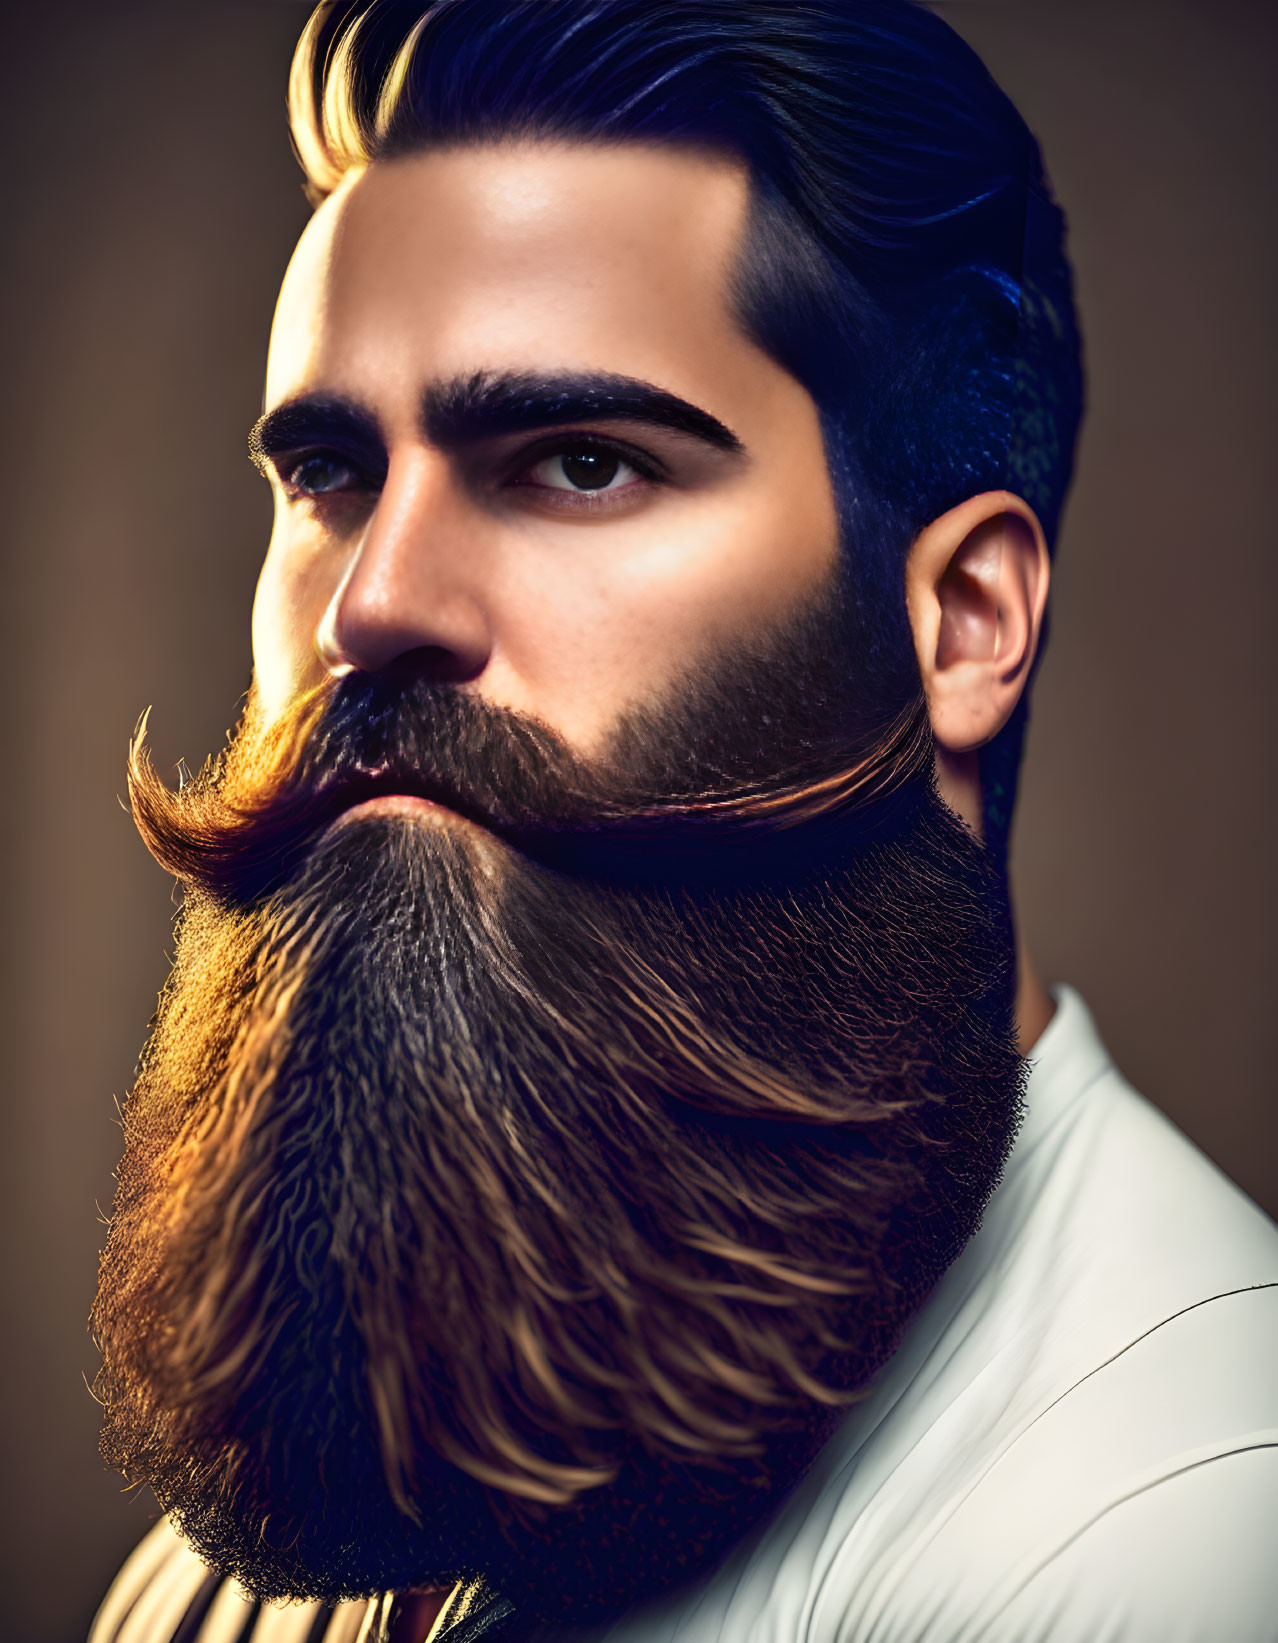 Man with Groomed Beard, Styled Mustache, and Slicked-Back Hair on Warm